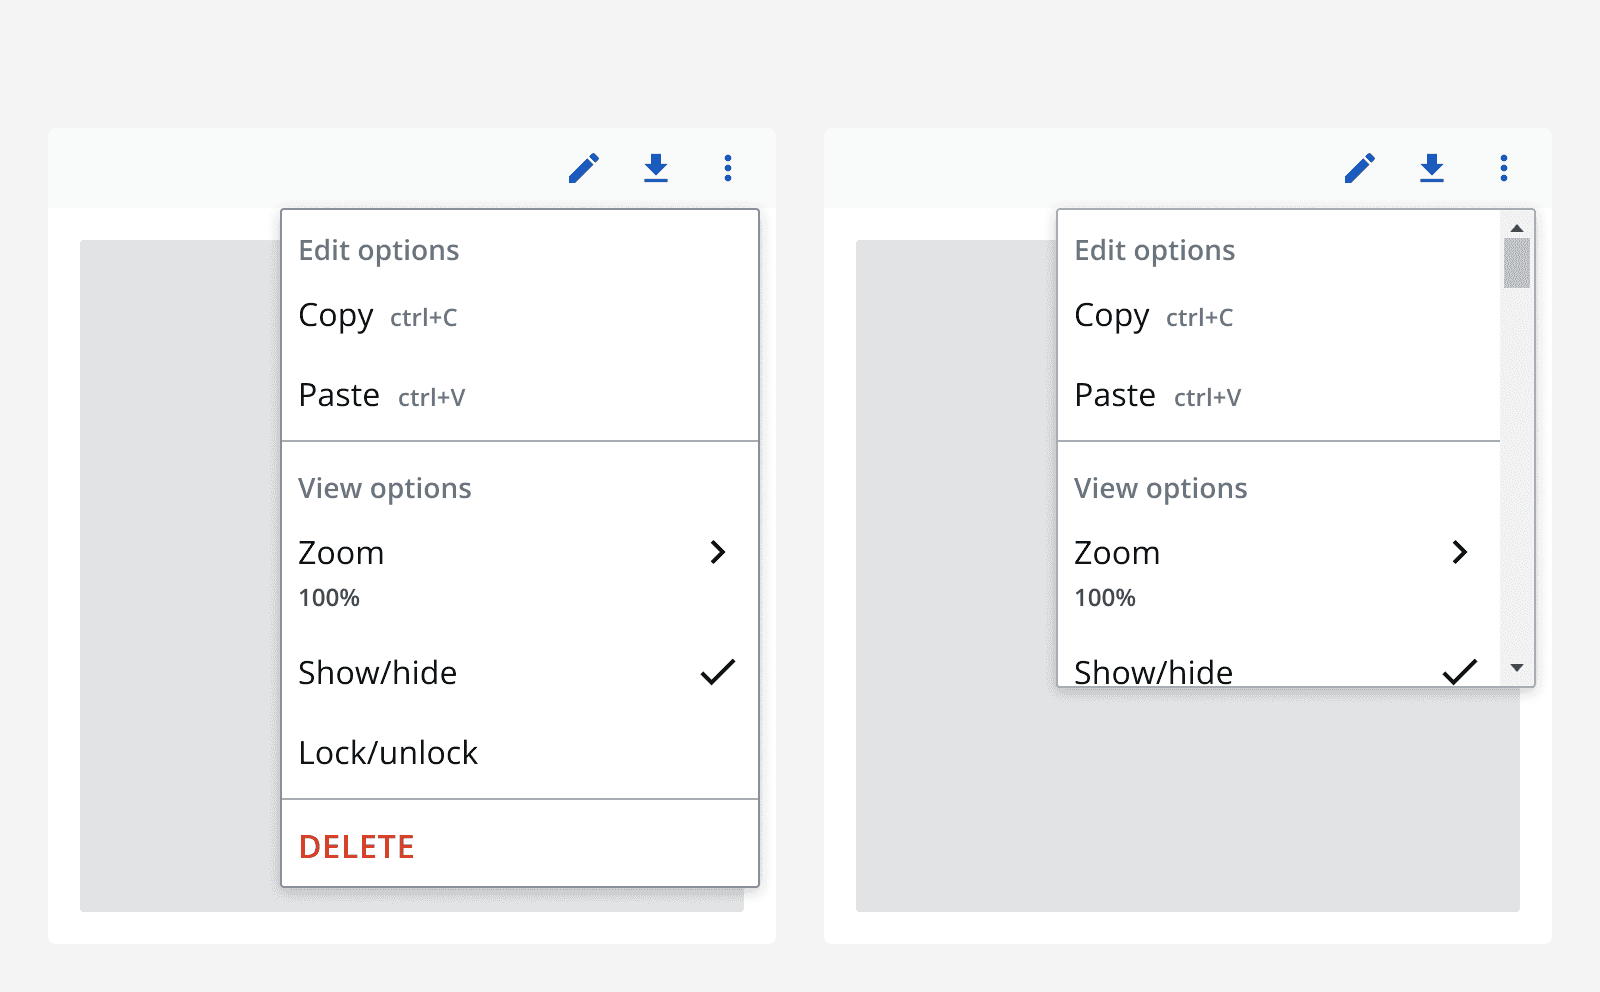 Two examples of popover menus. The first displays all menu items within the menu container. The second example shows the same menu items, but with some hidden due to a smaller menu container. A scroll bar allows the menu to be scrolled.